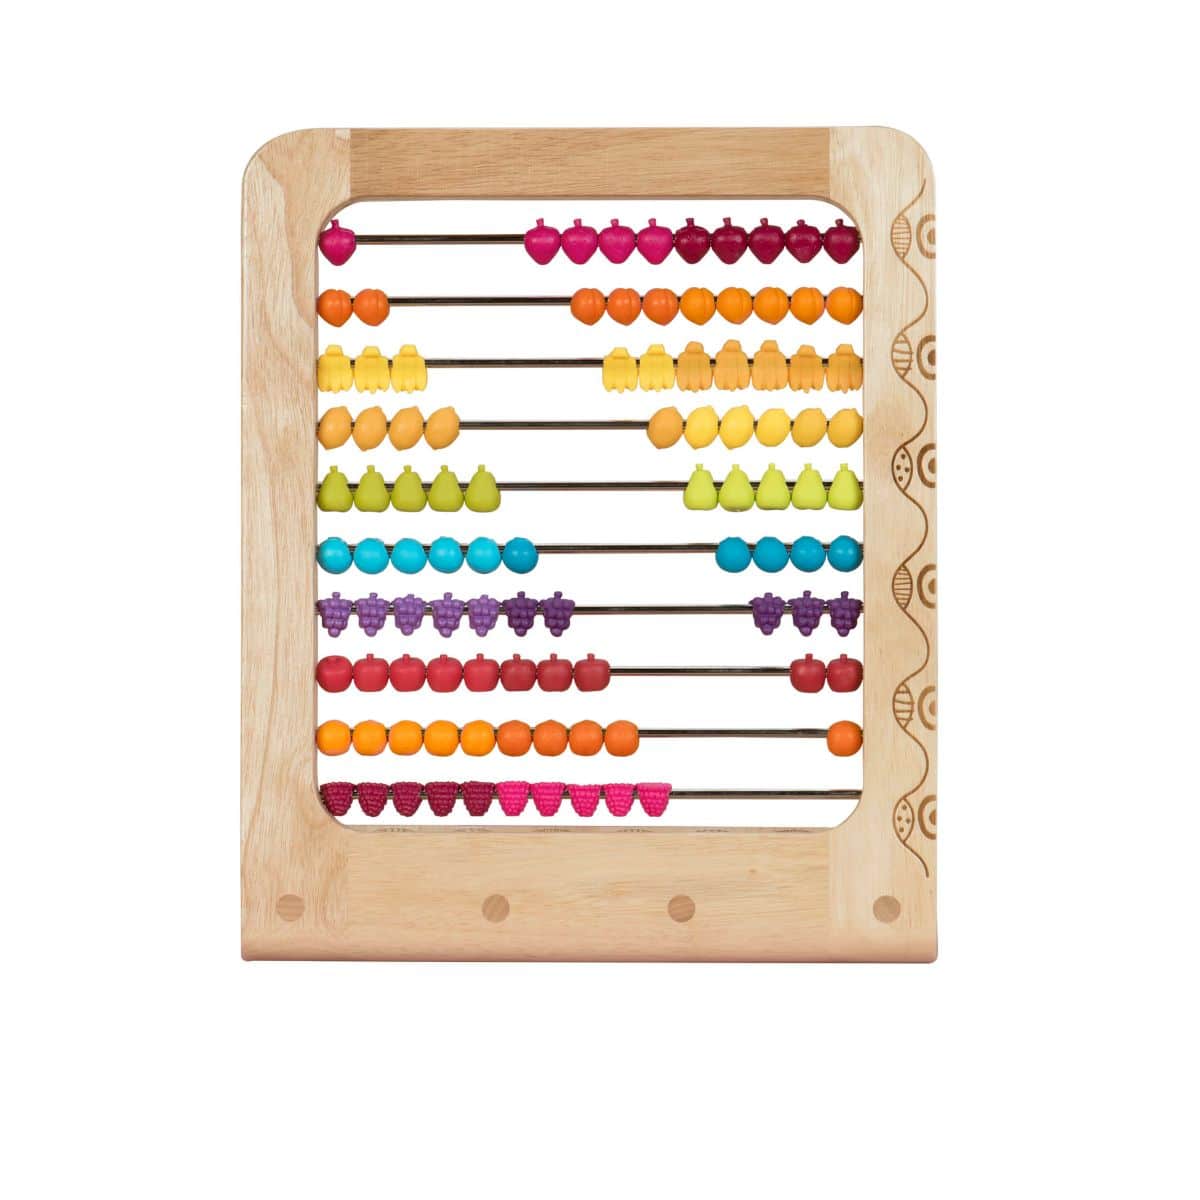 Fruit-themed wooden abacus.